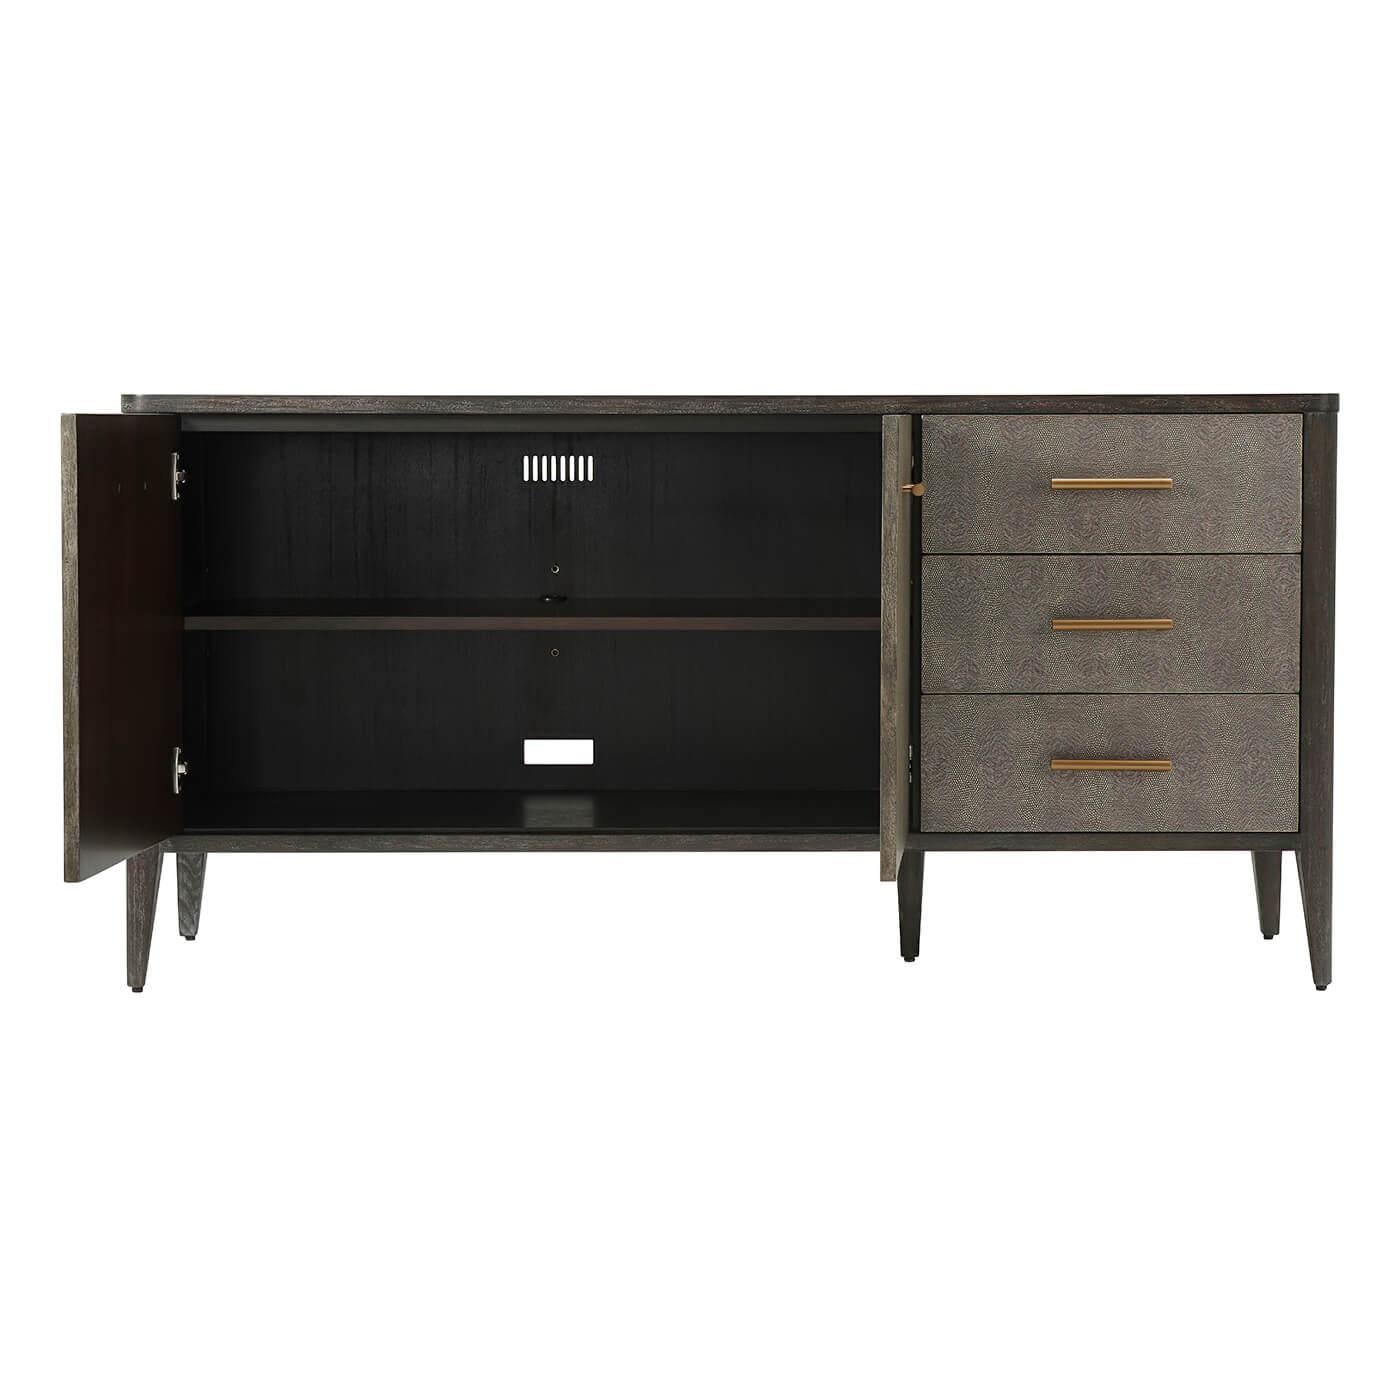 Mid-Century Modern Modern Leather Wrapped Sideboard, Tempest Dark